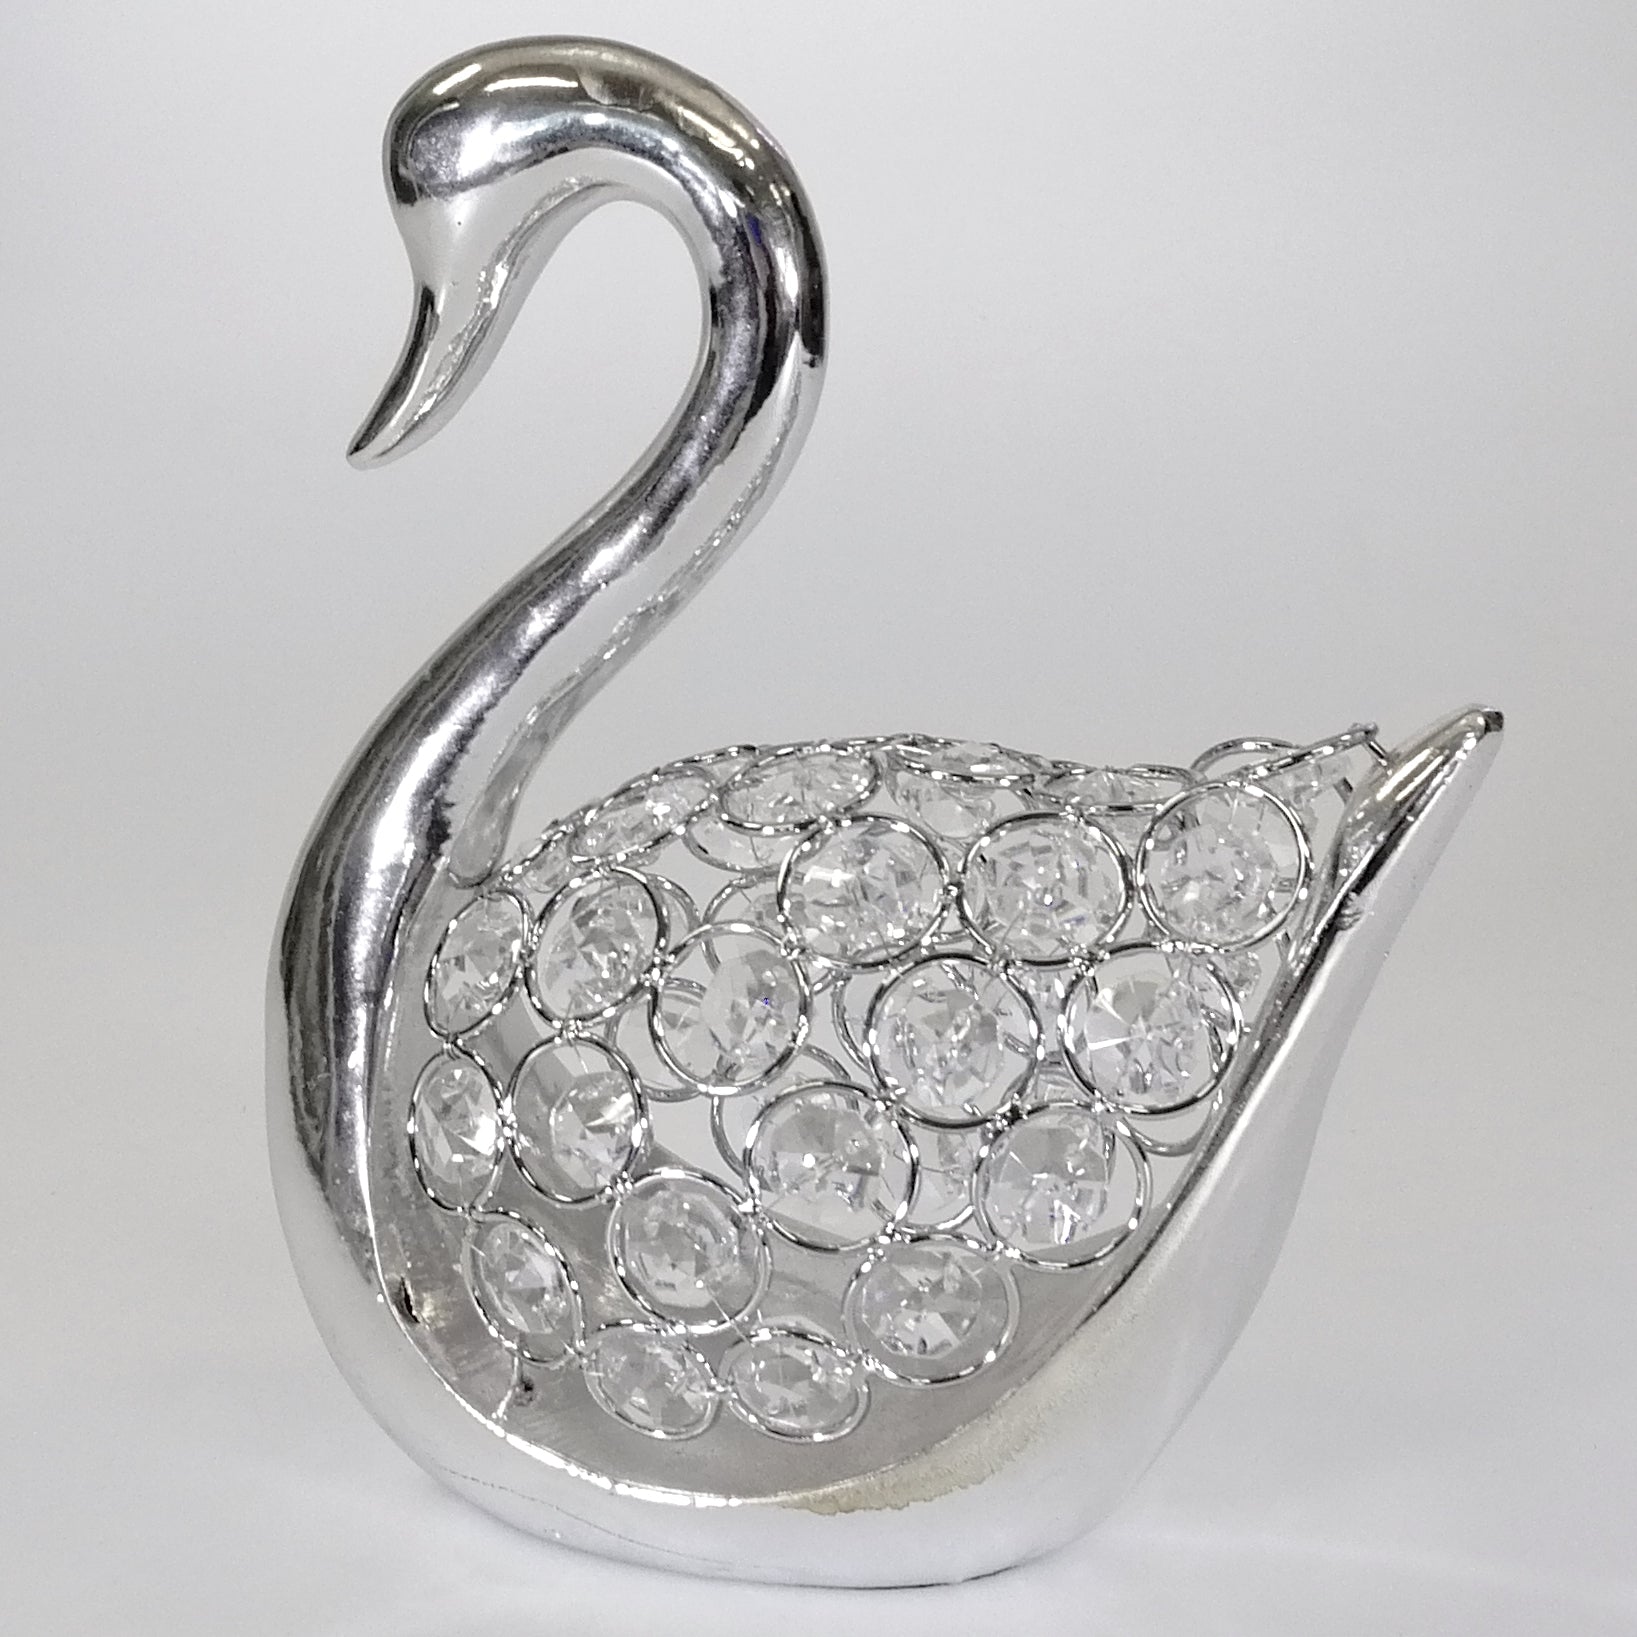 Electroplated Bling Swan Ornament